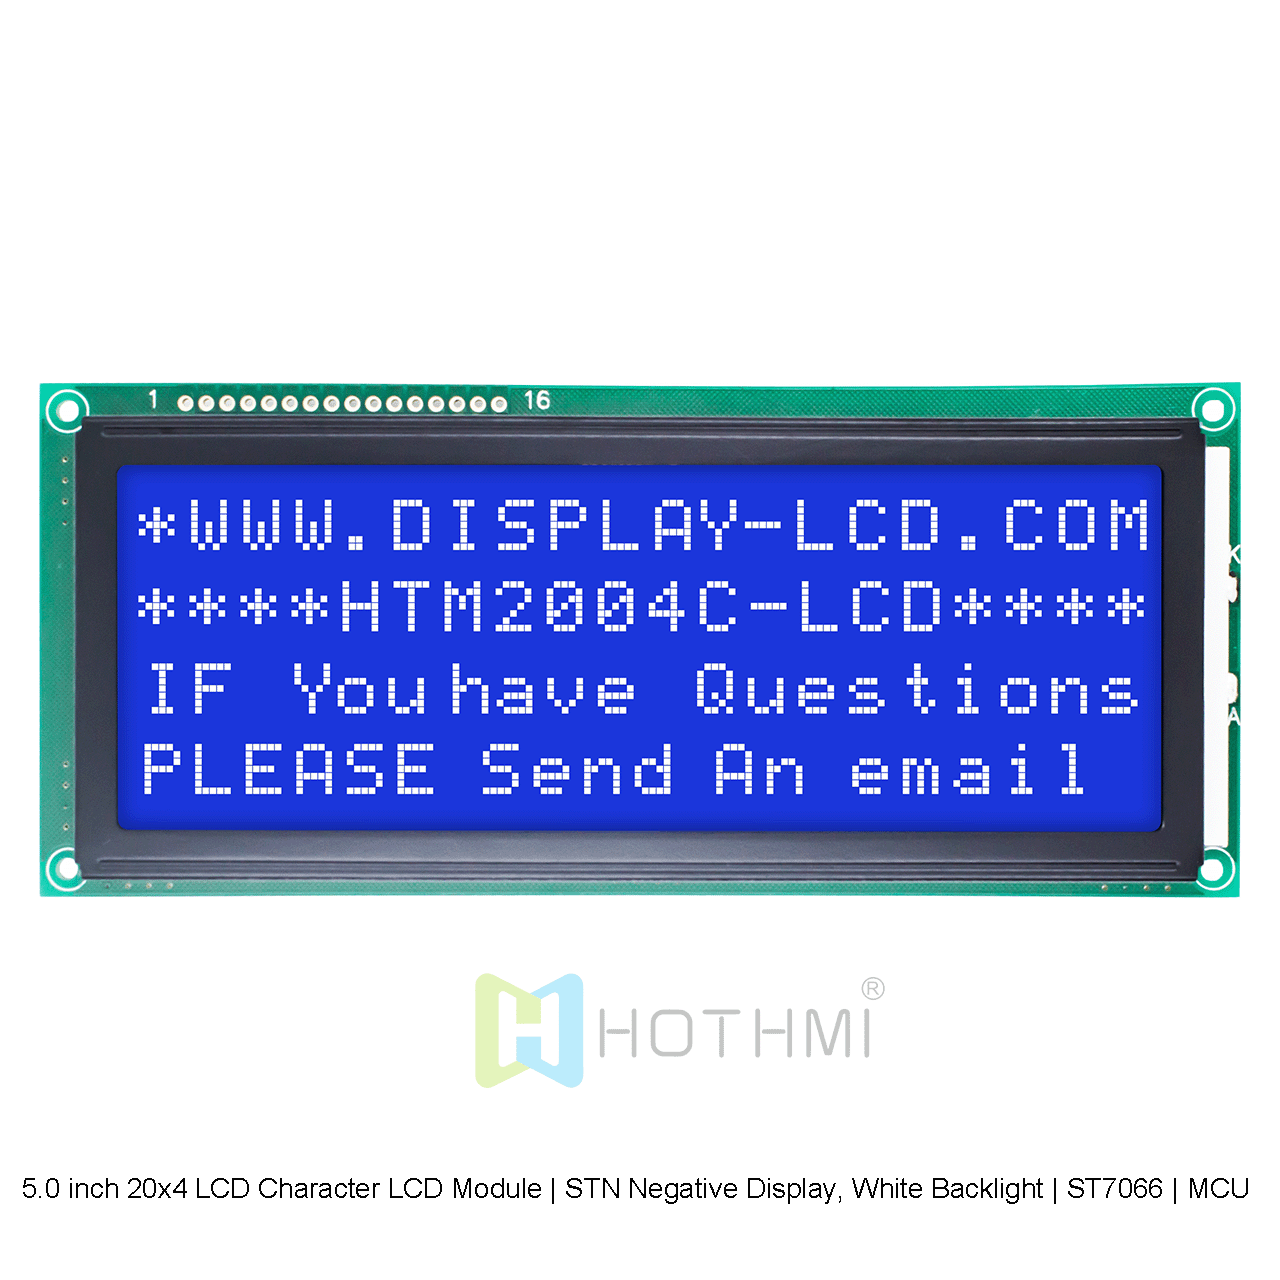 5.0 inch 20x4 LCD Character LCD Module | STN Negative Display, White Backlight | ST7066 | MCU Interface | White Characters on Blue Background Arduino